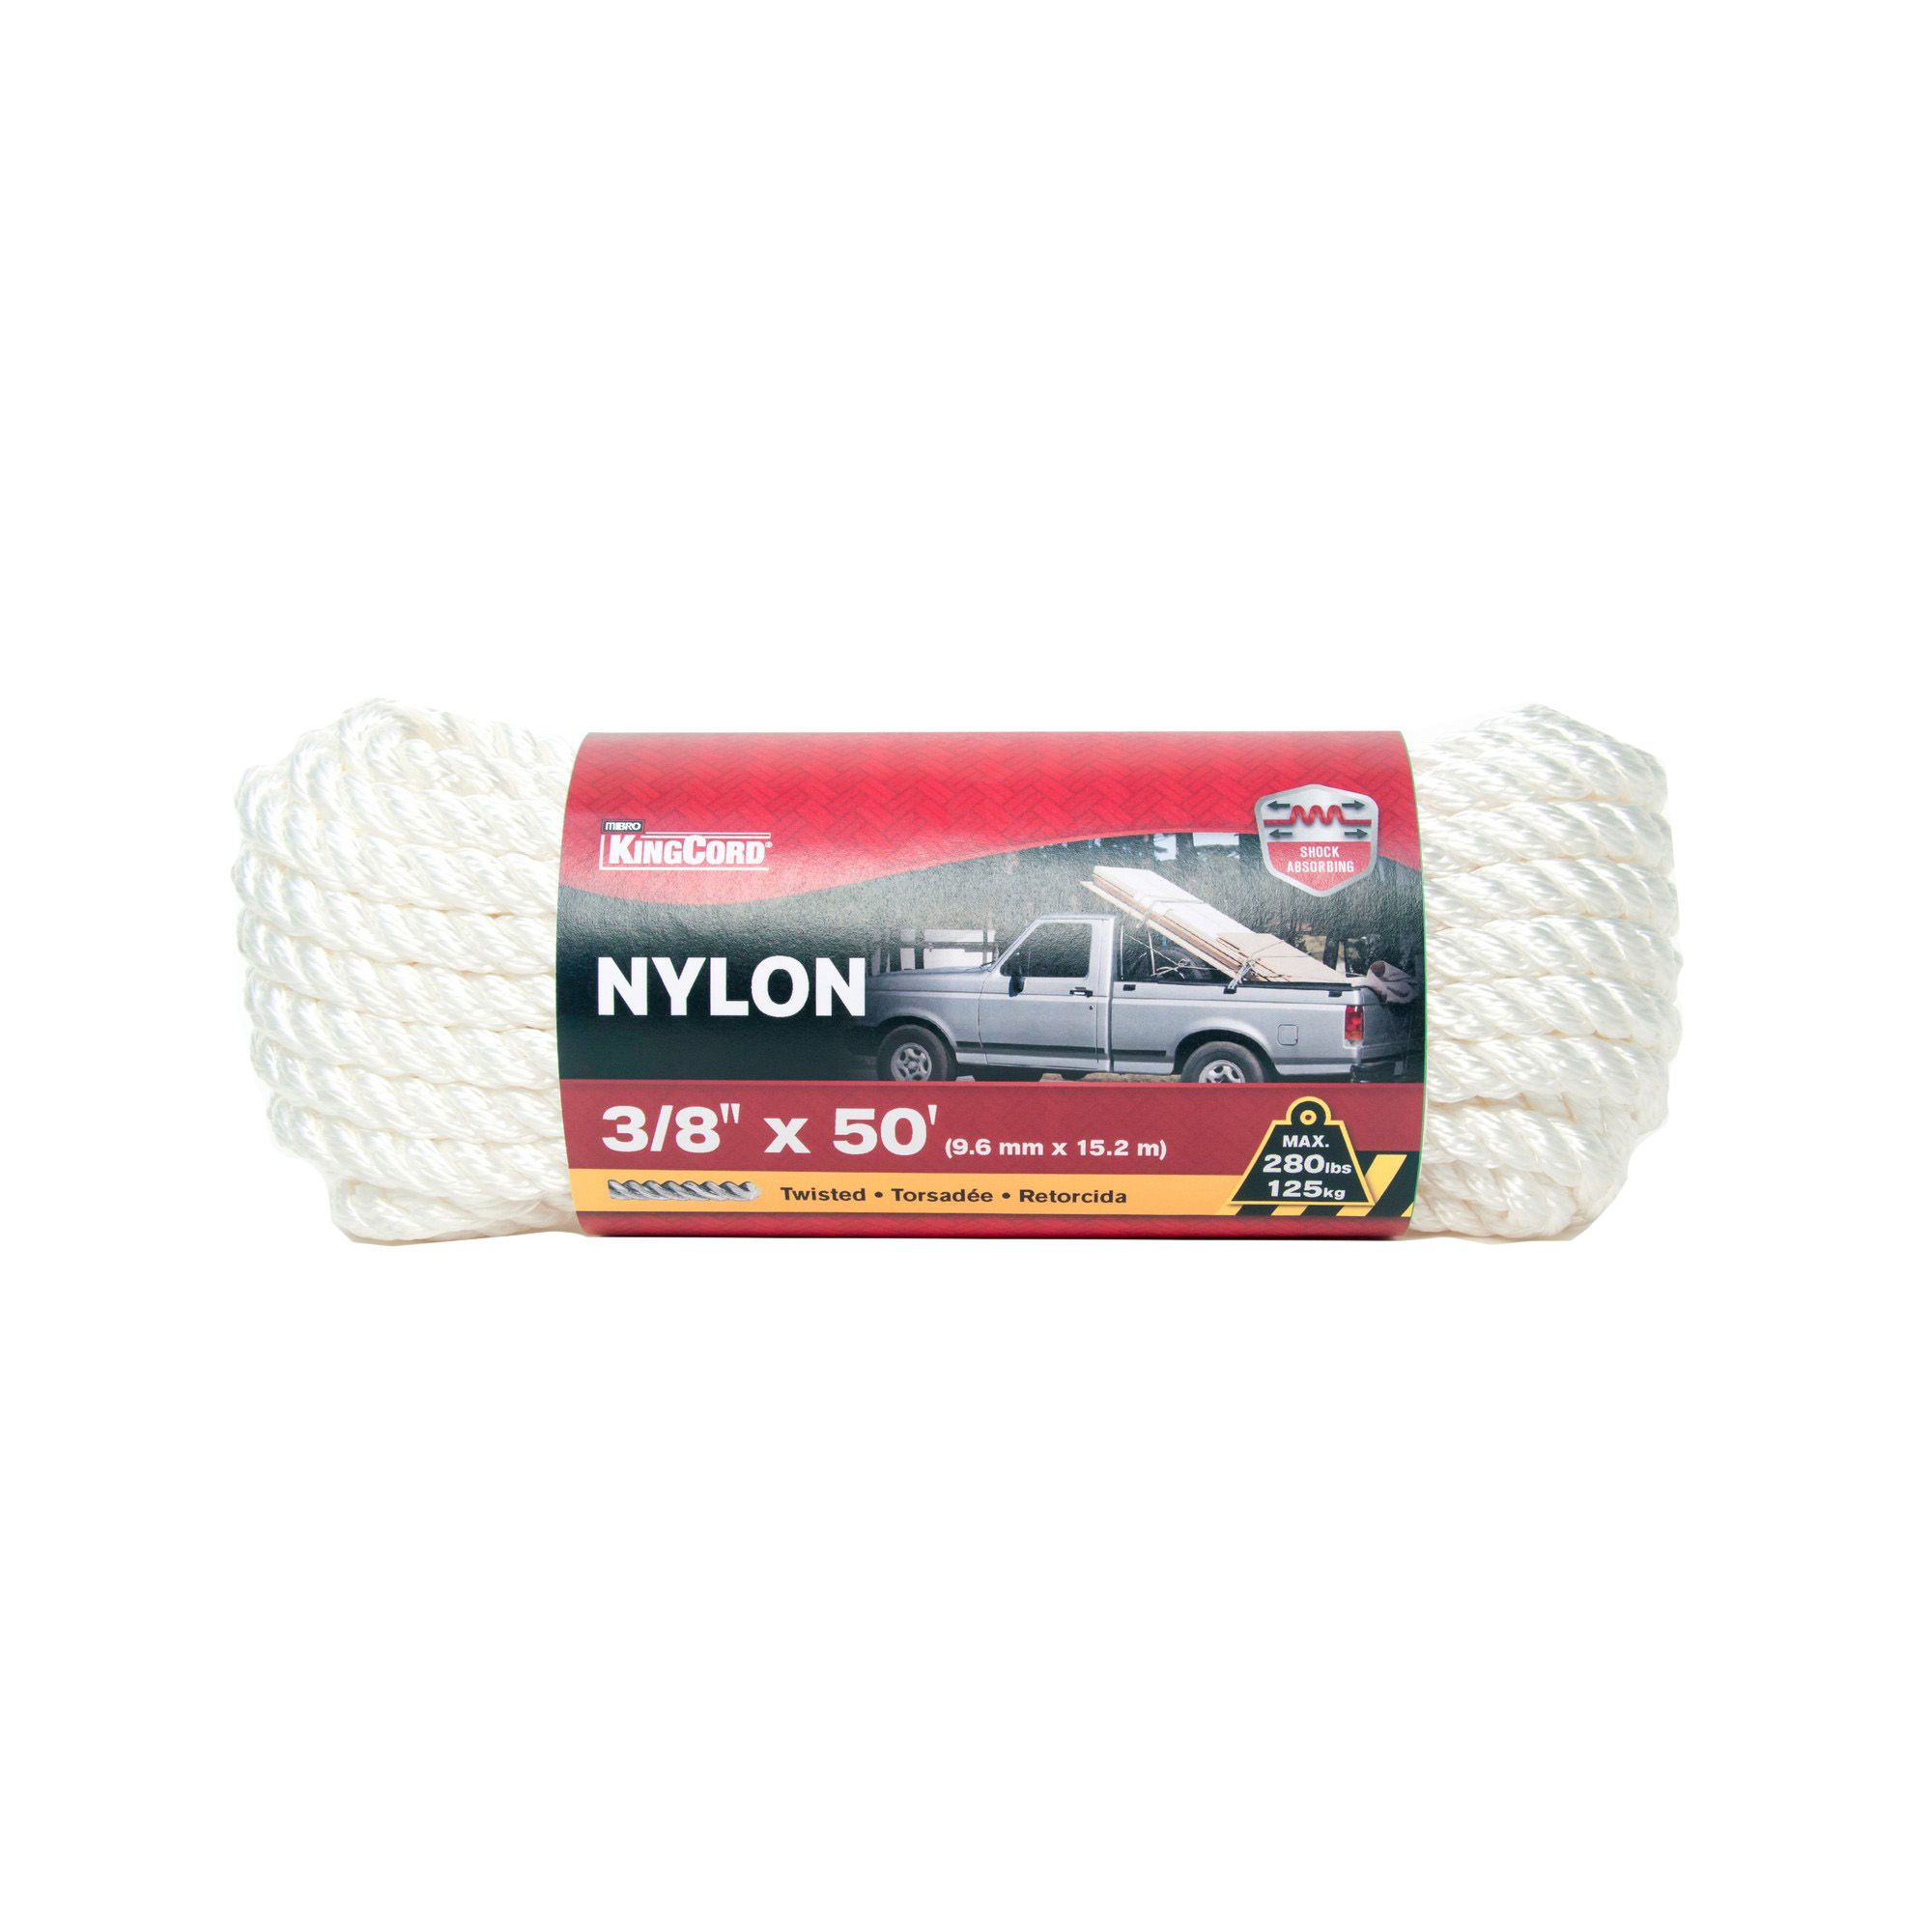 Nylon Twisted Rope - White - 3/8 x 50' from KINGCORD